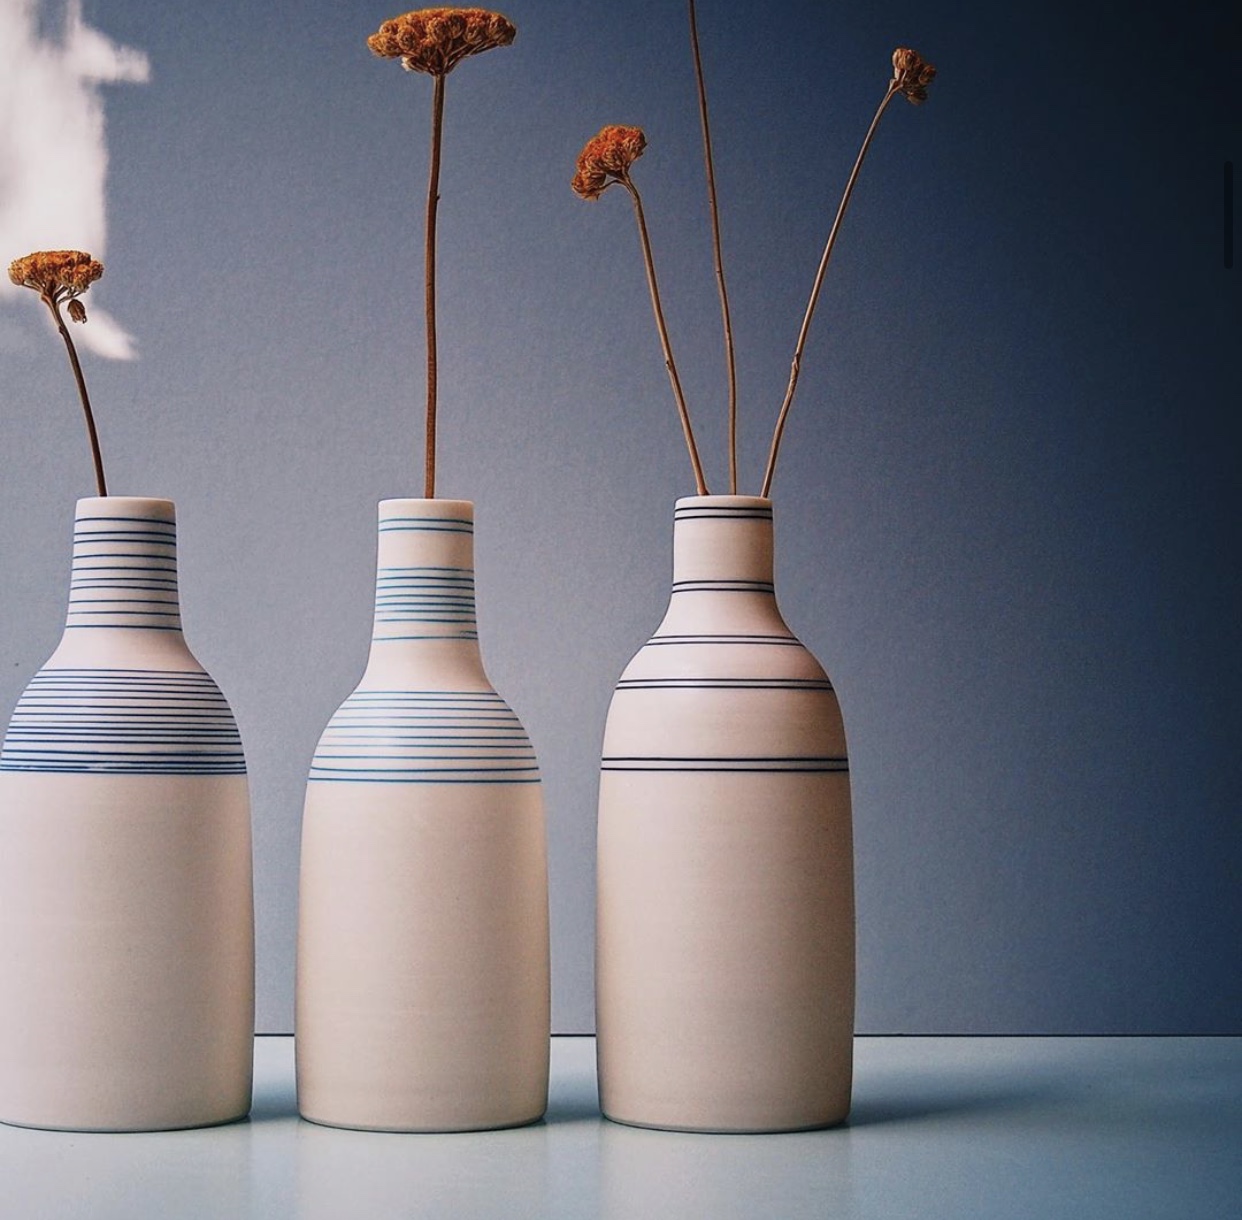 Modern pottery is tasteful, simple, clean lined and dull. Please don't  revive it, Art and design